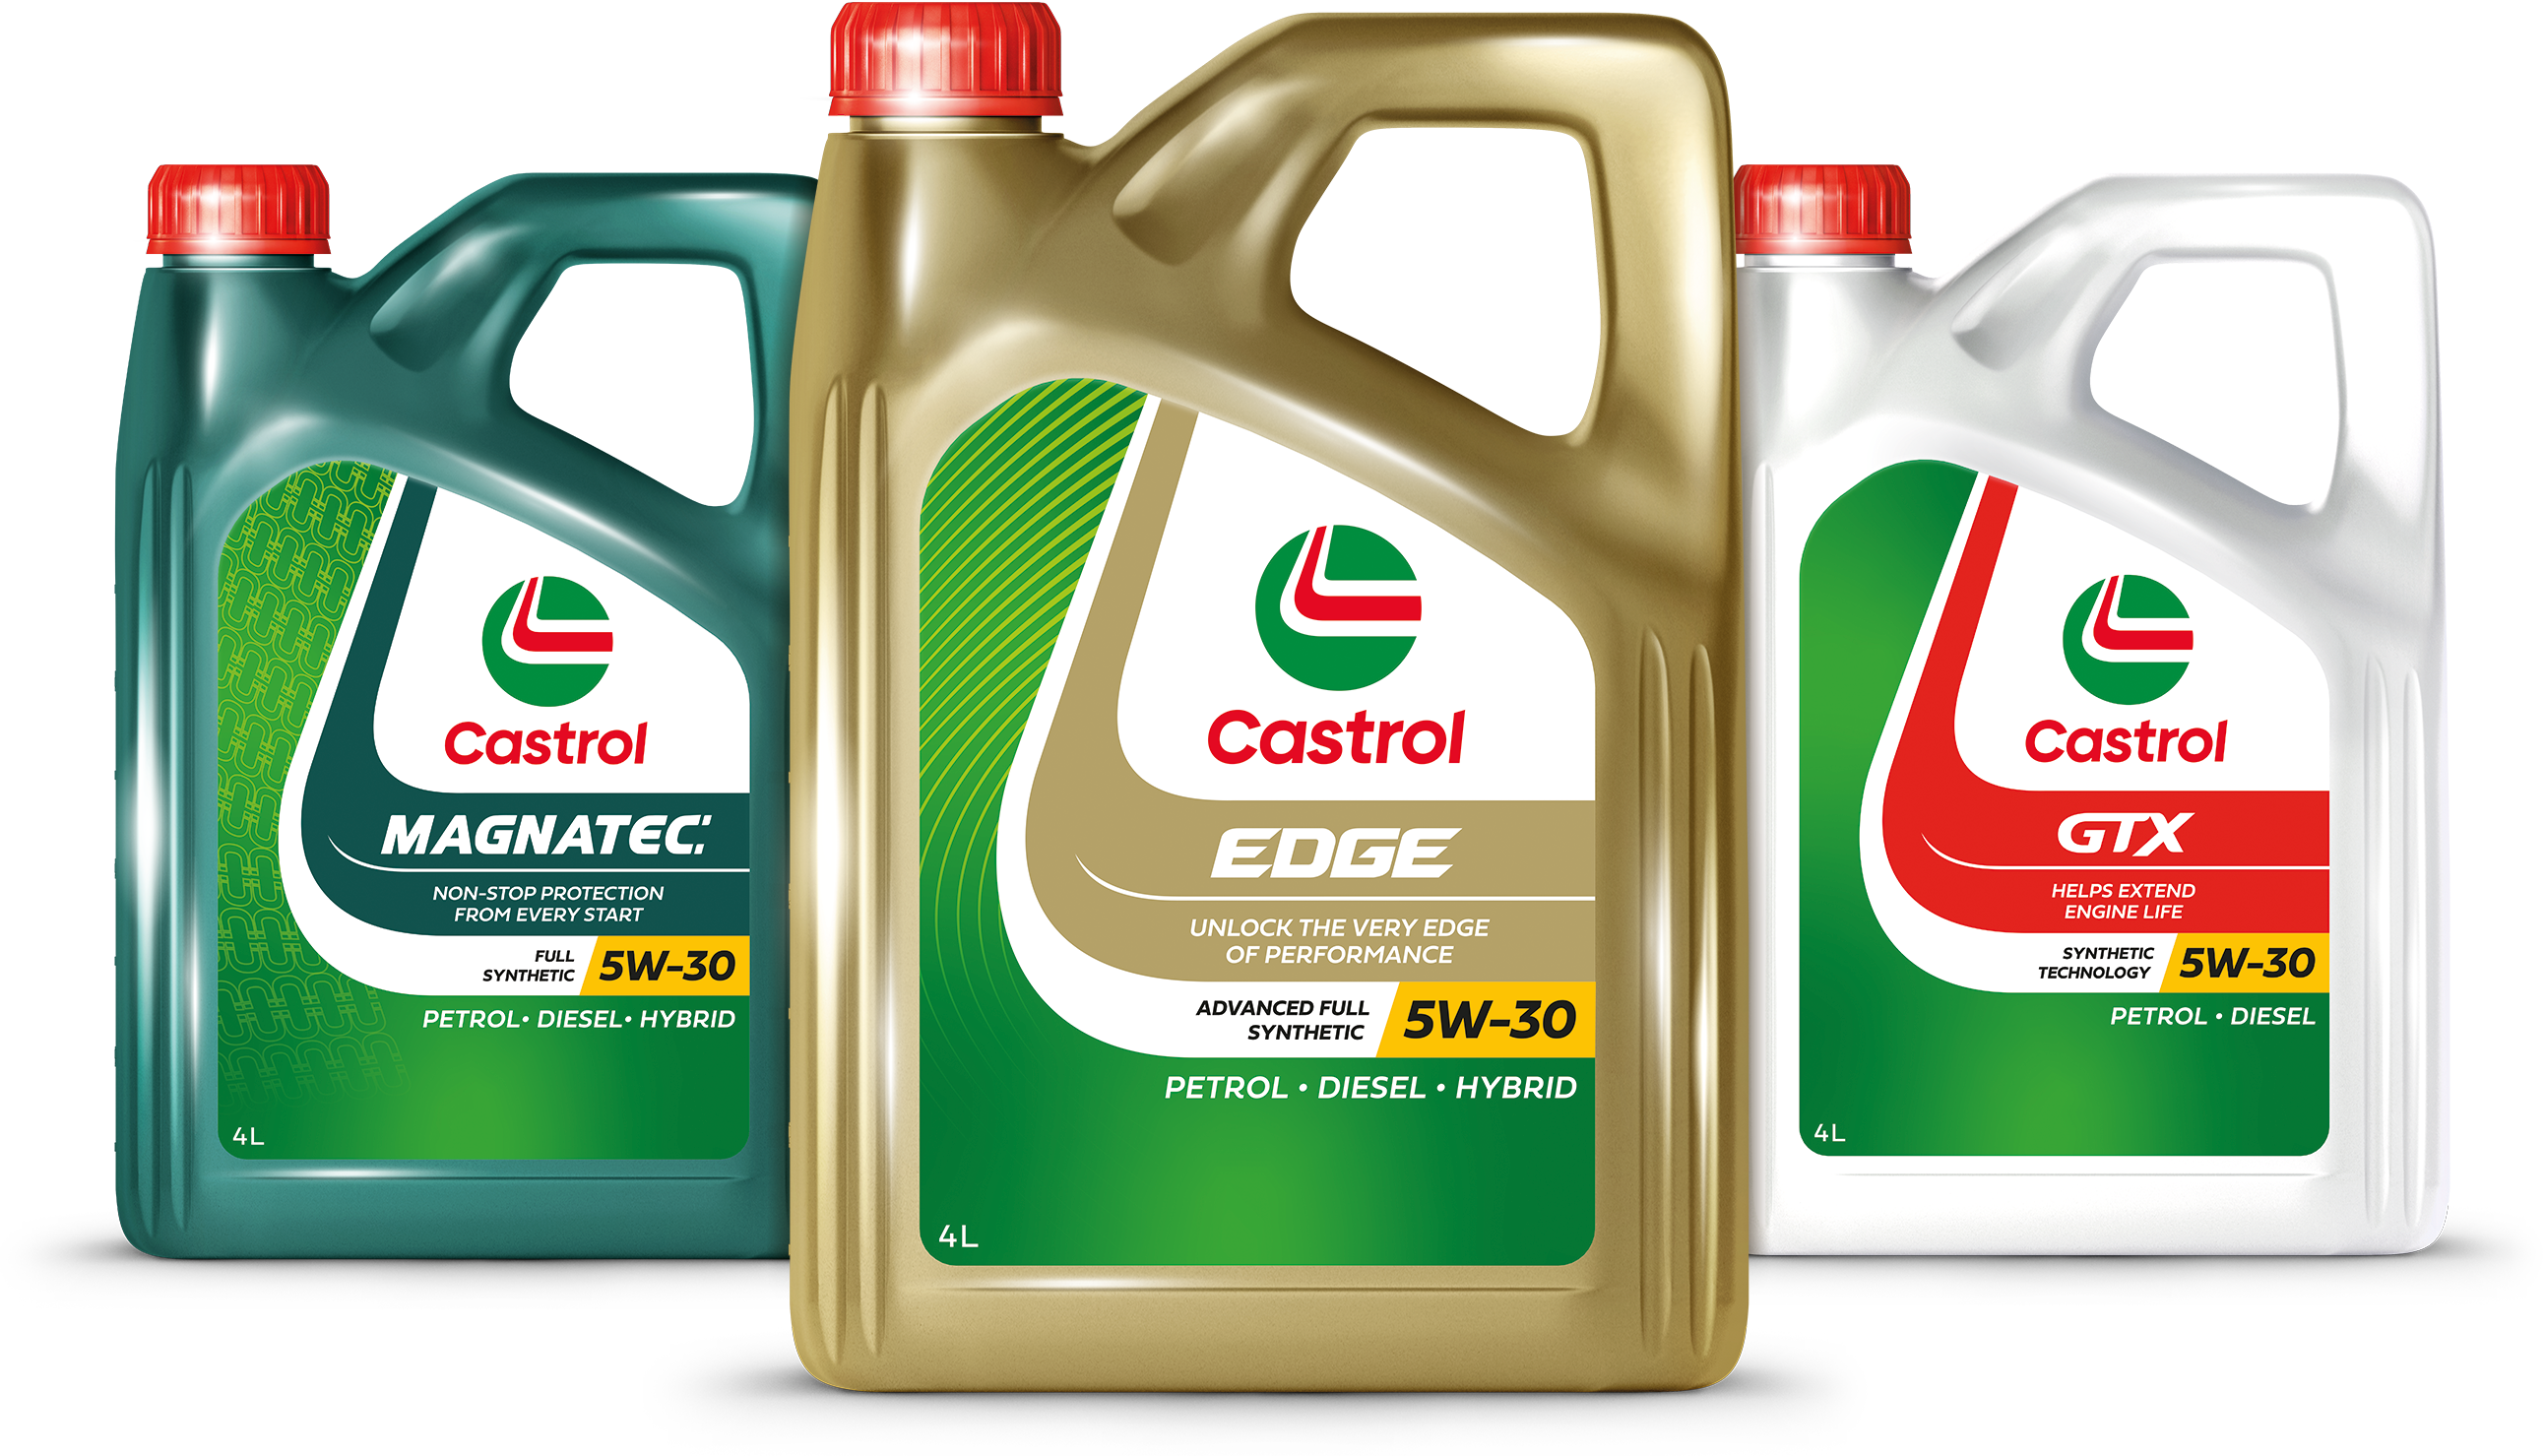 Download Castrol Heavy Duty Lubricants Logo PNG and Vector (PDF, SVG, Ai,  EPS) Free